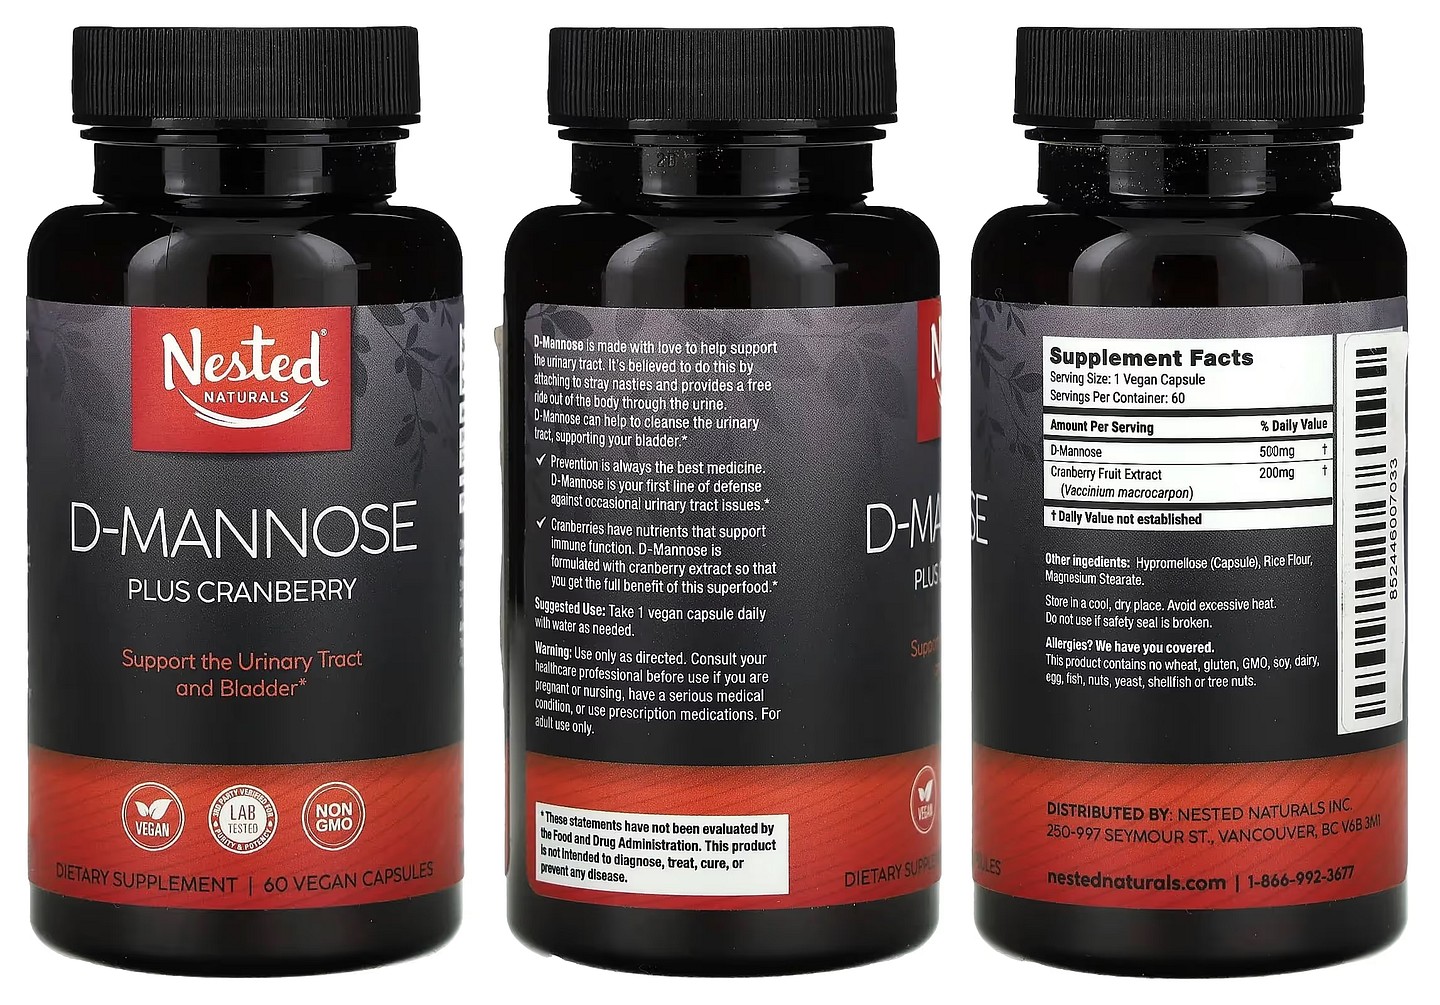 Nested Naturals, D-Mannose Plus Cranberry packaging